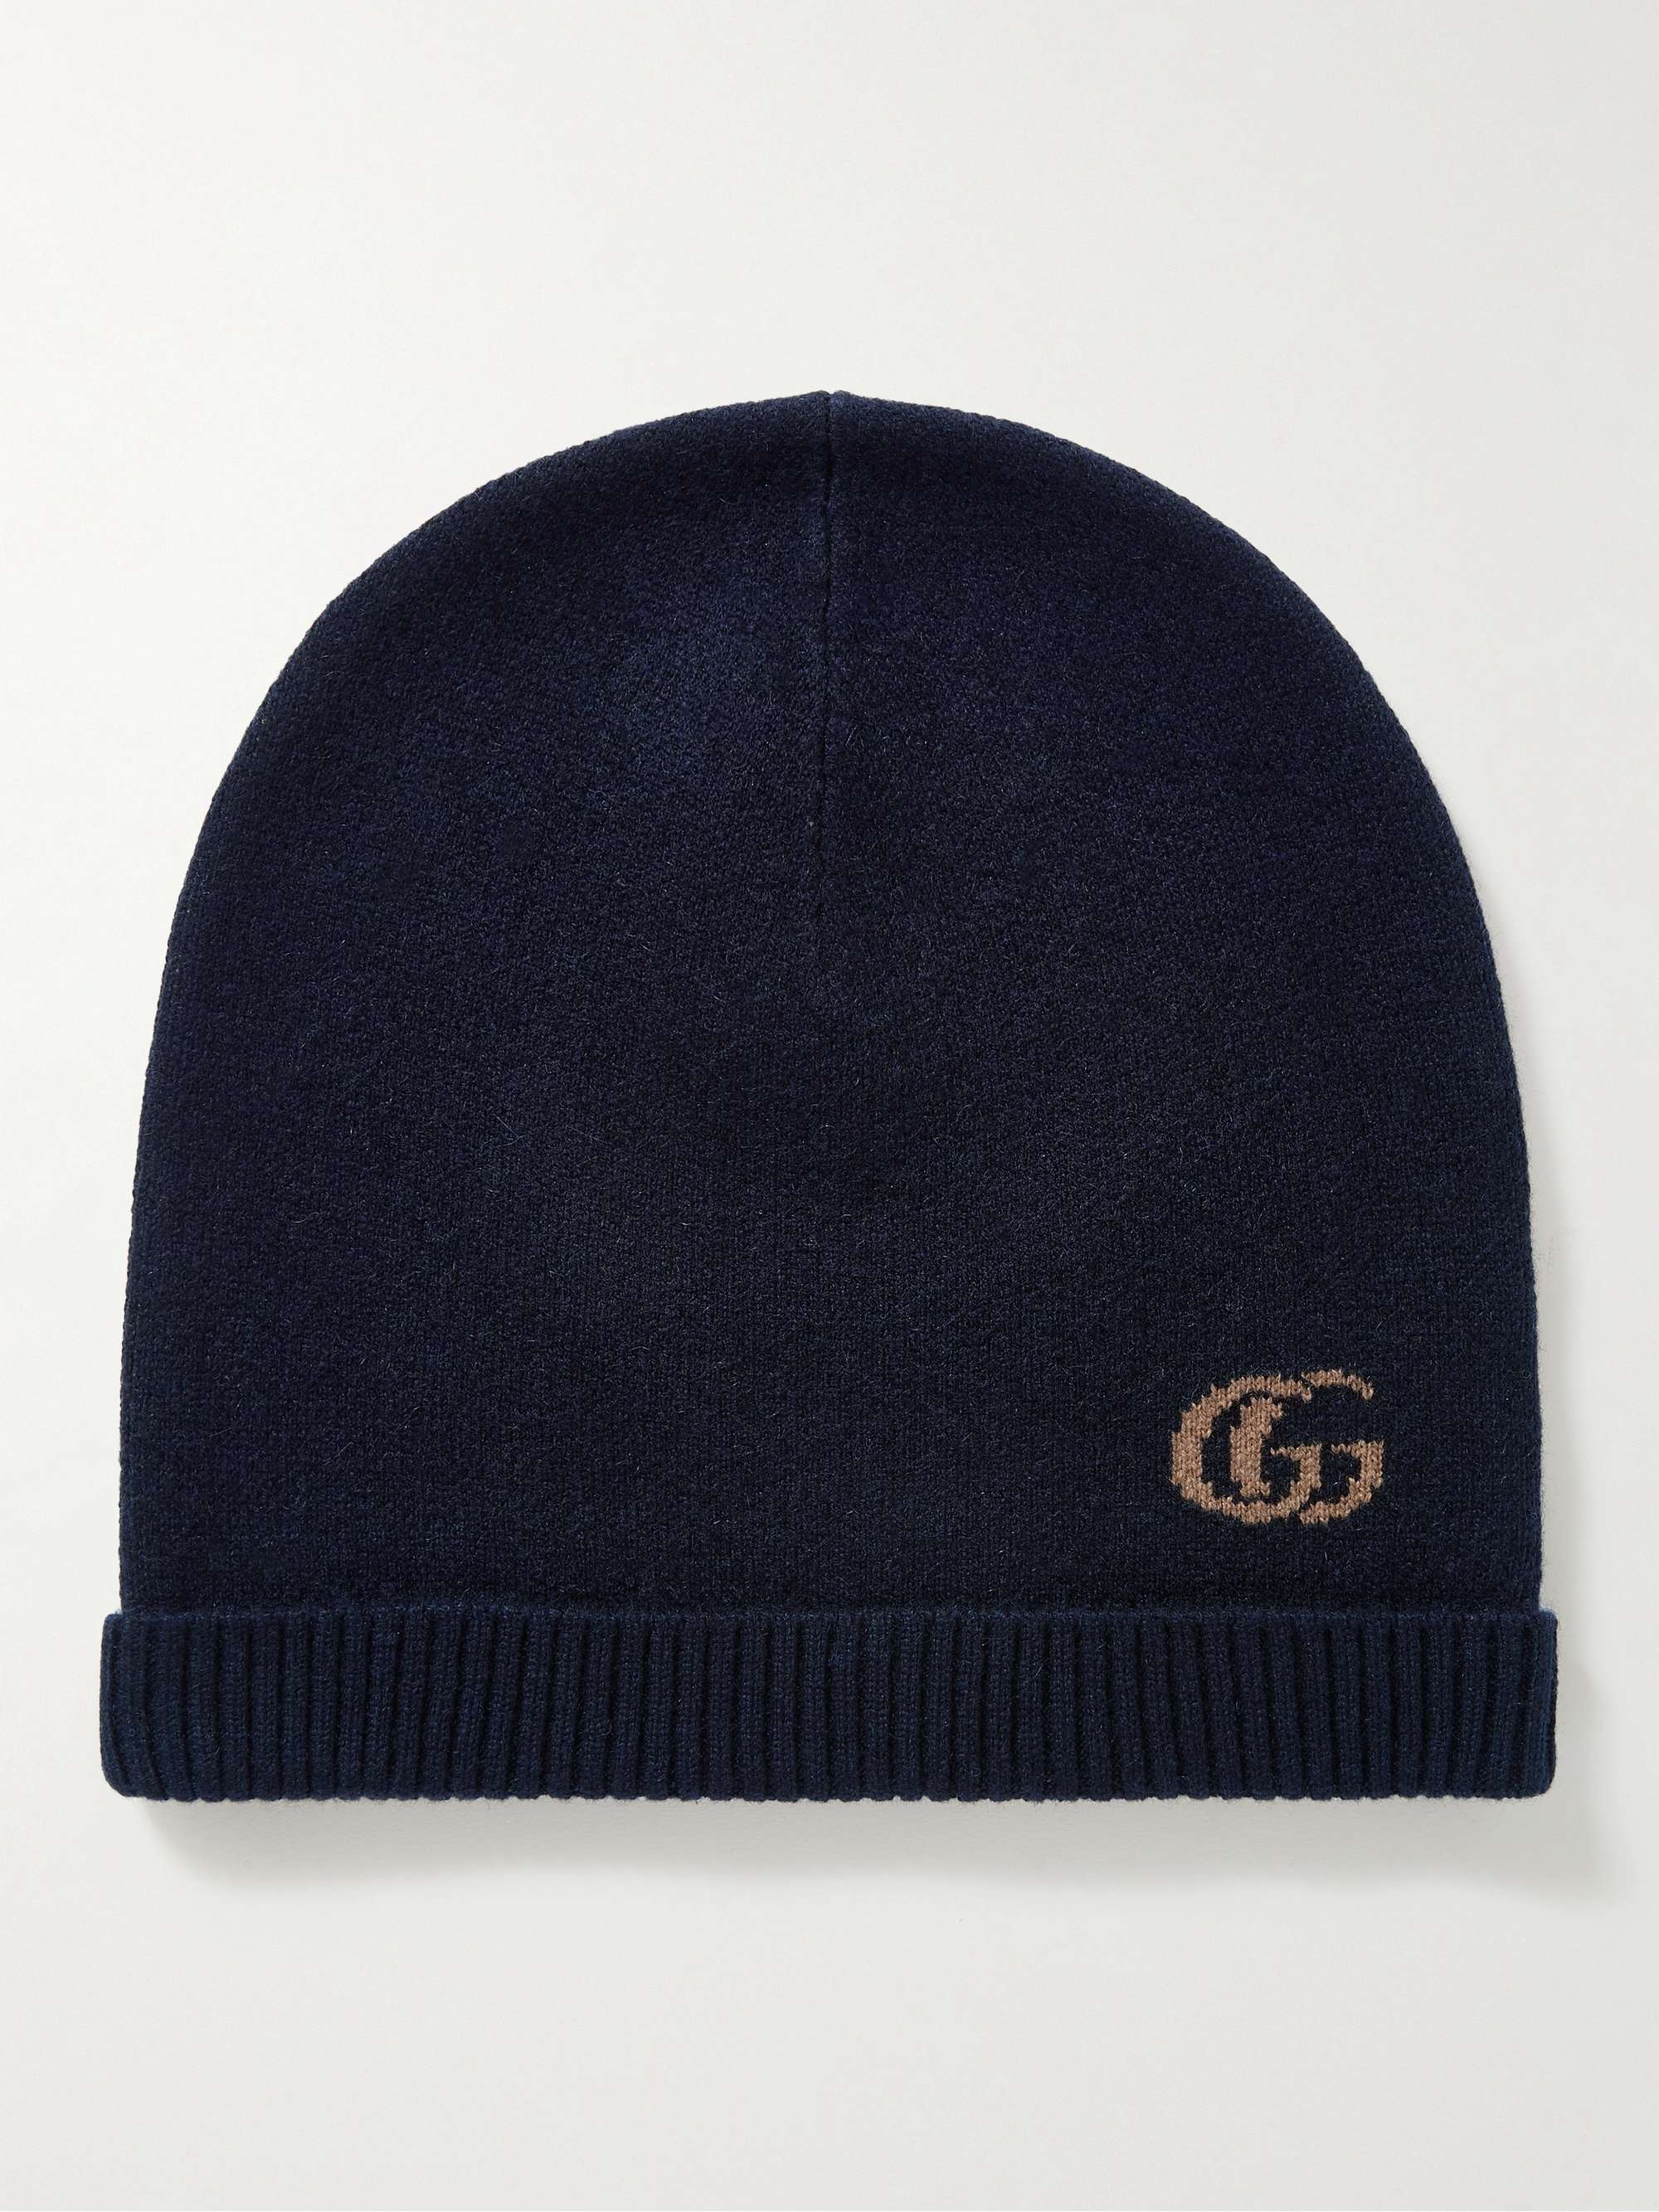 GUCCI Logo-Jacquard Cashmere and Wool-Blend Beanie